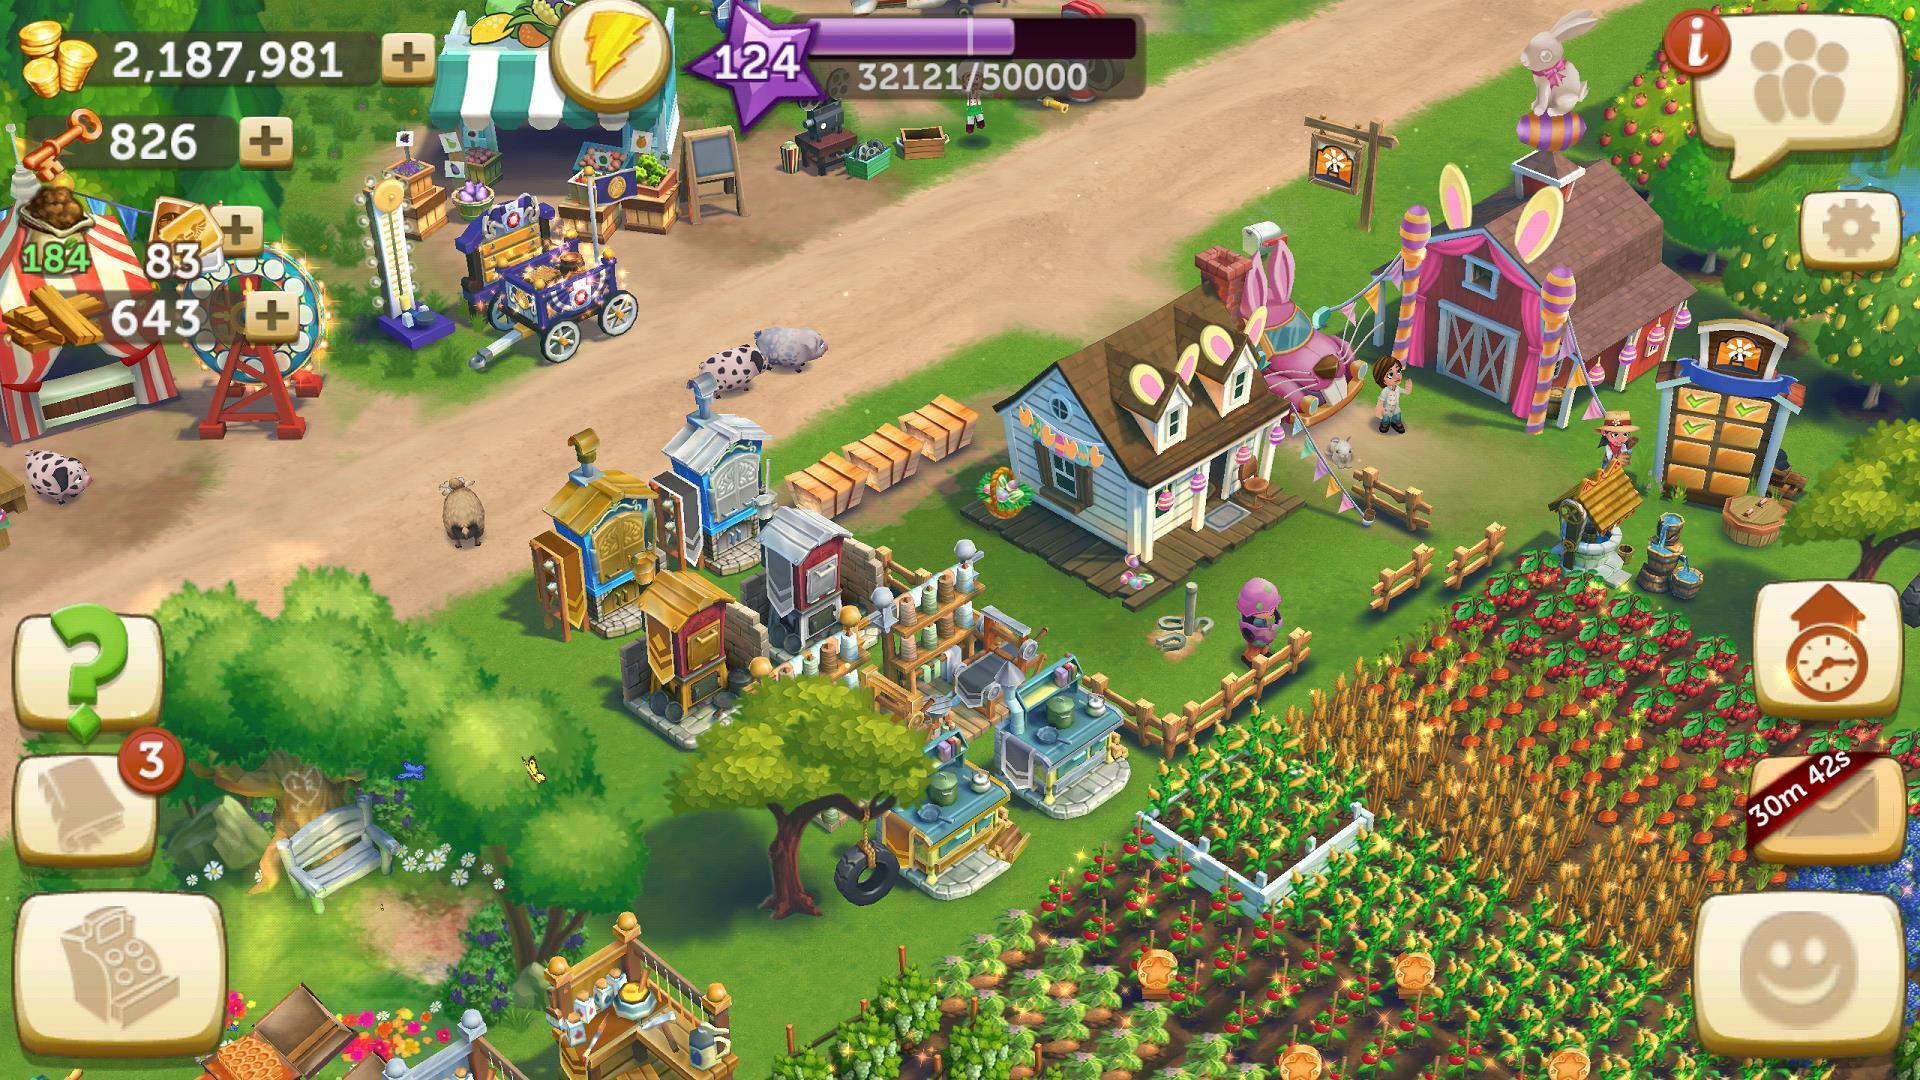 FarmVille 2: Country Escape crops up on iOS, Android - CNET